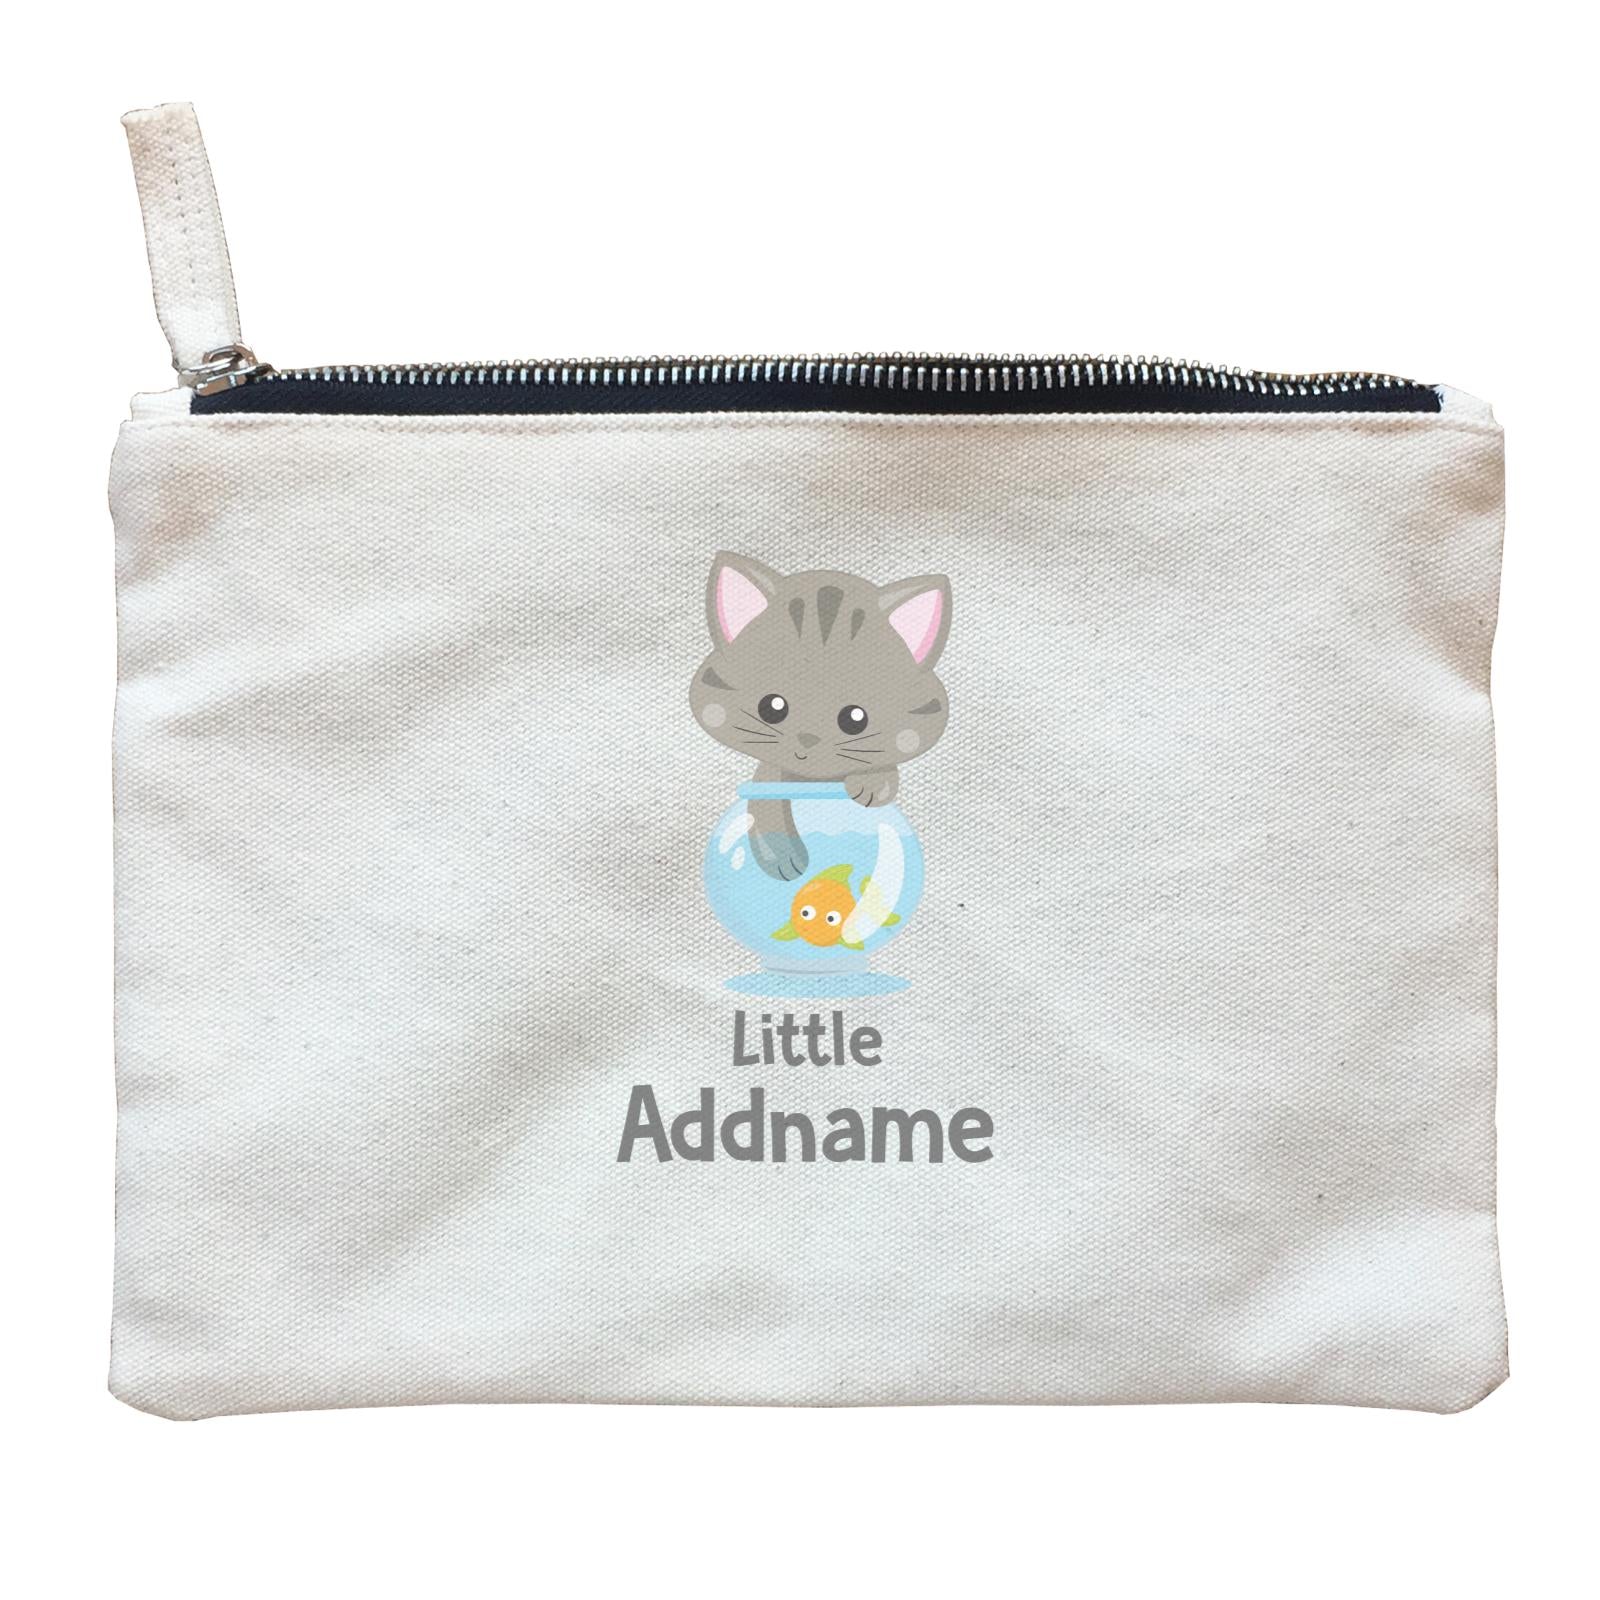 Adorable Cats Grey Cat Playing With Fish Bowl Little Addname Zipper Pouch